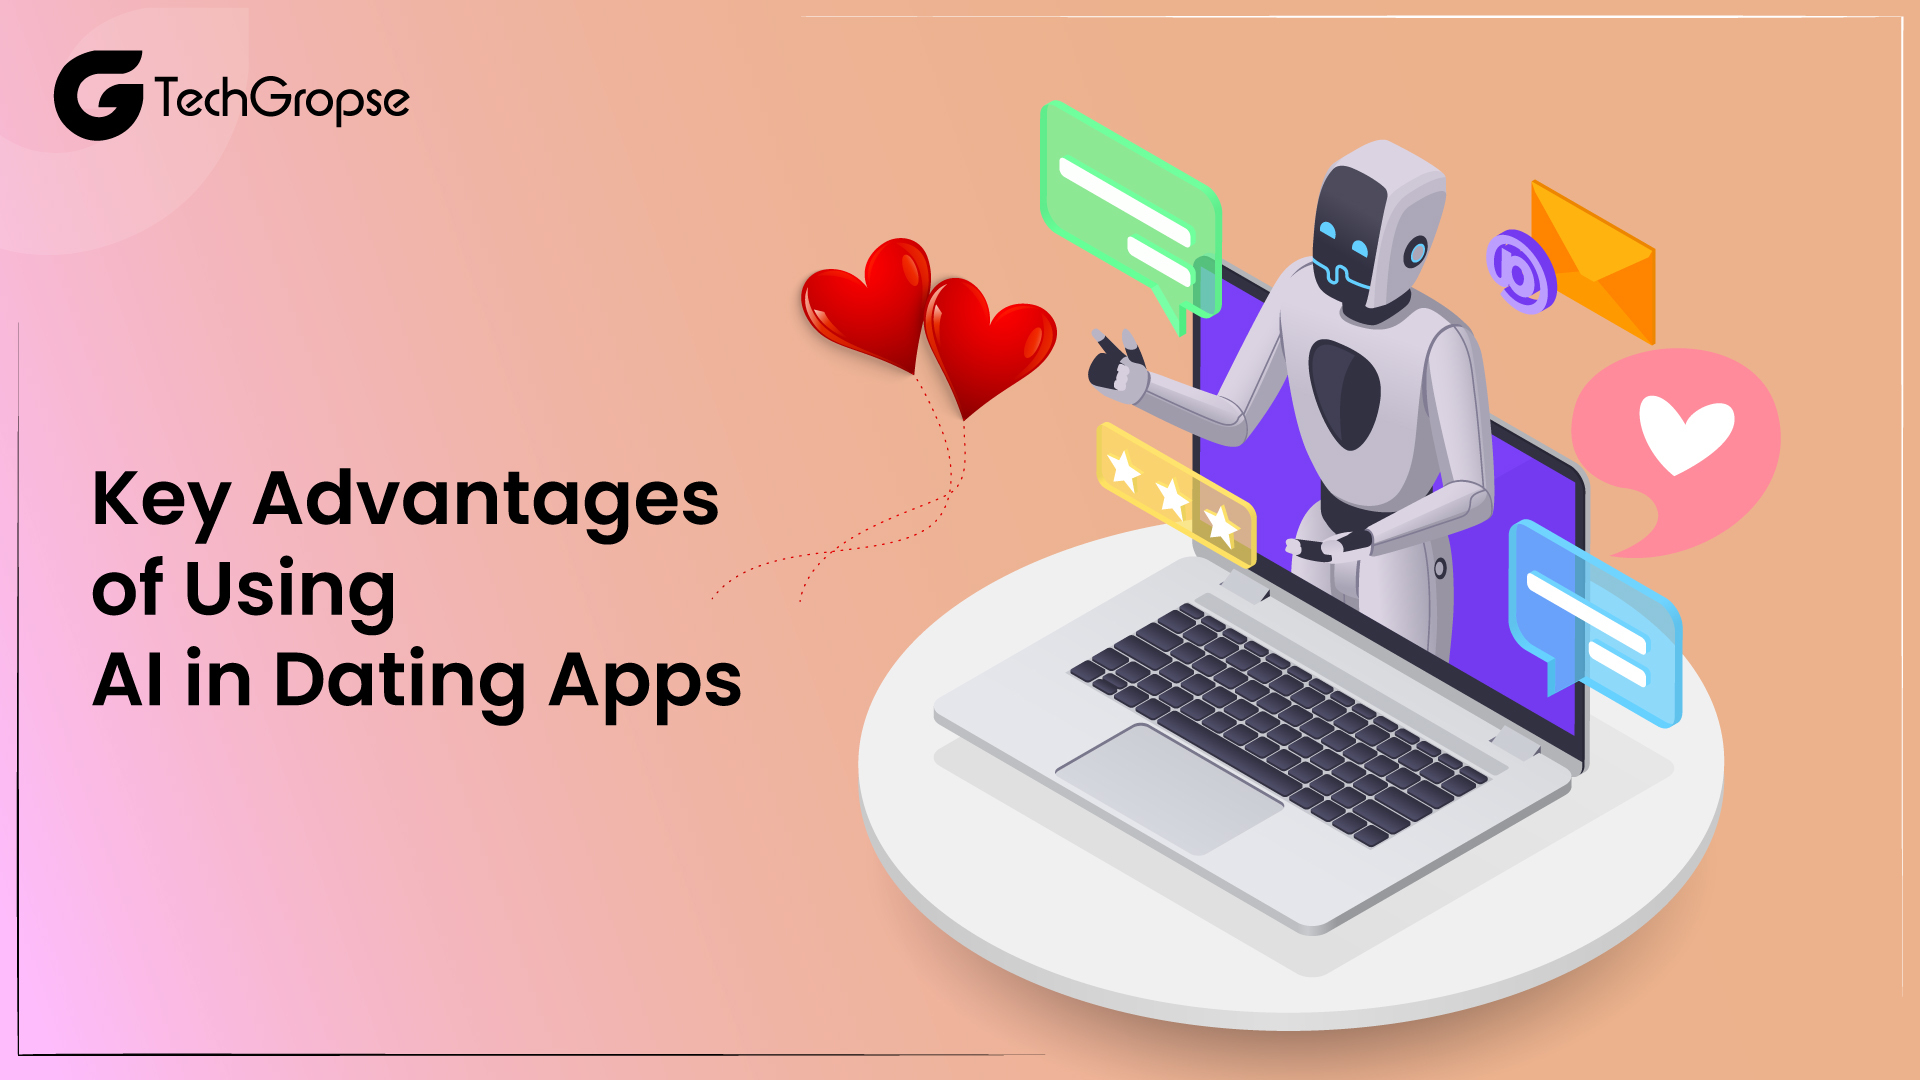 Key Advantages of Using AI in Dating Apps